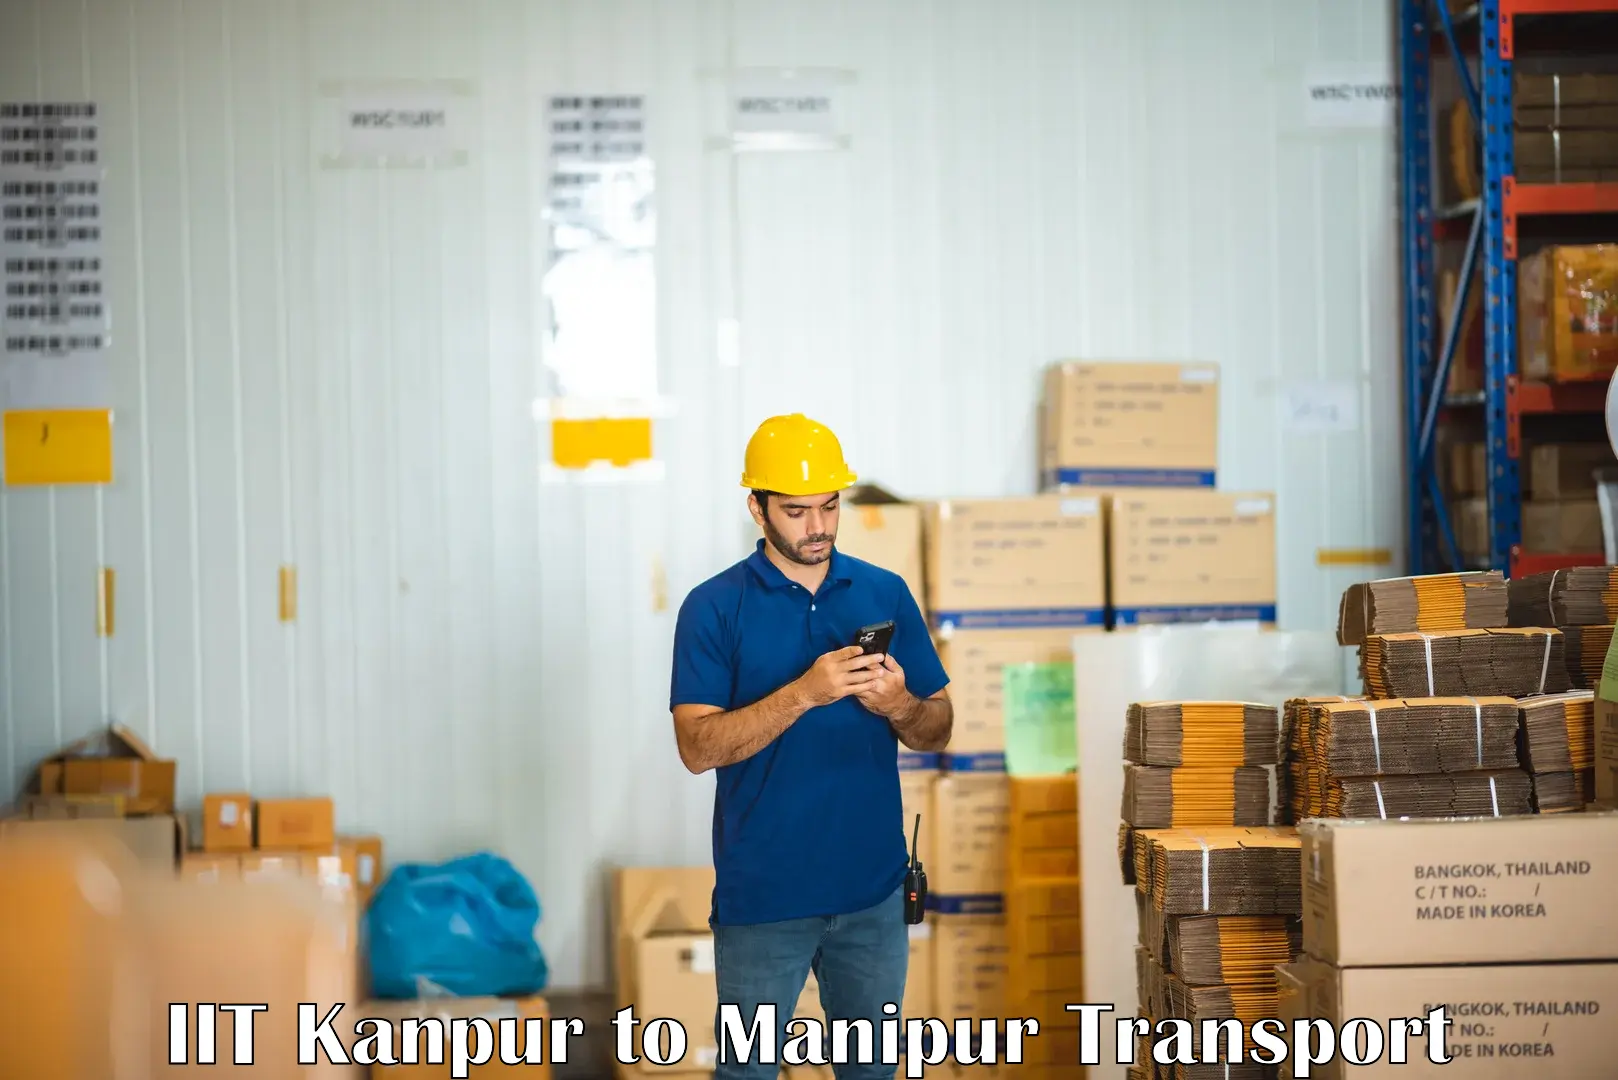 Nationwide transport services IIT Kanpur to Manipur